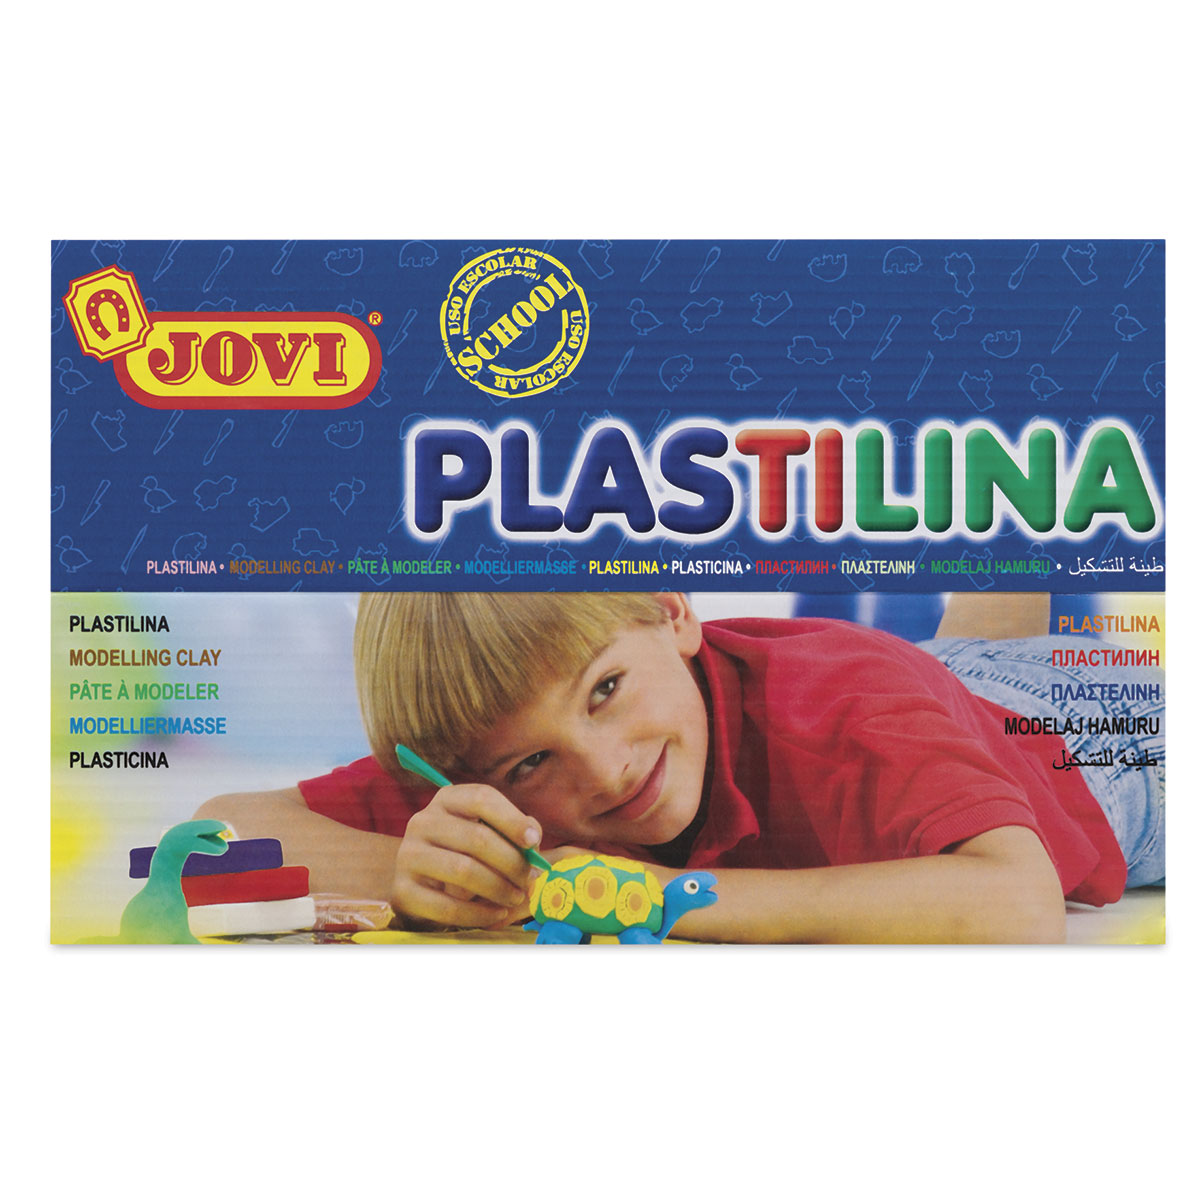 Jovi Plastilina Reusable and Non-Drying Modeling Clay; Nature Colors, 1.75  Oz. Bars, Set of 18, 3 Each of 6 Colors, Perfect for Arts and Crafts